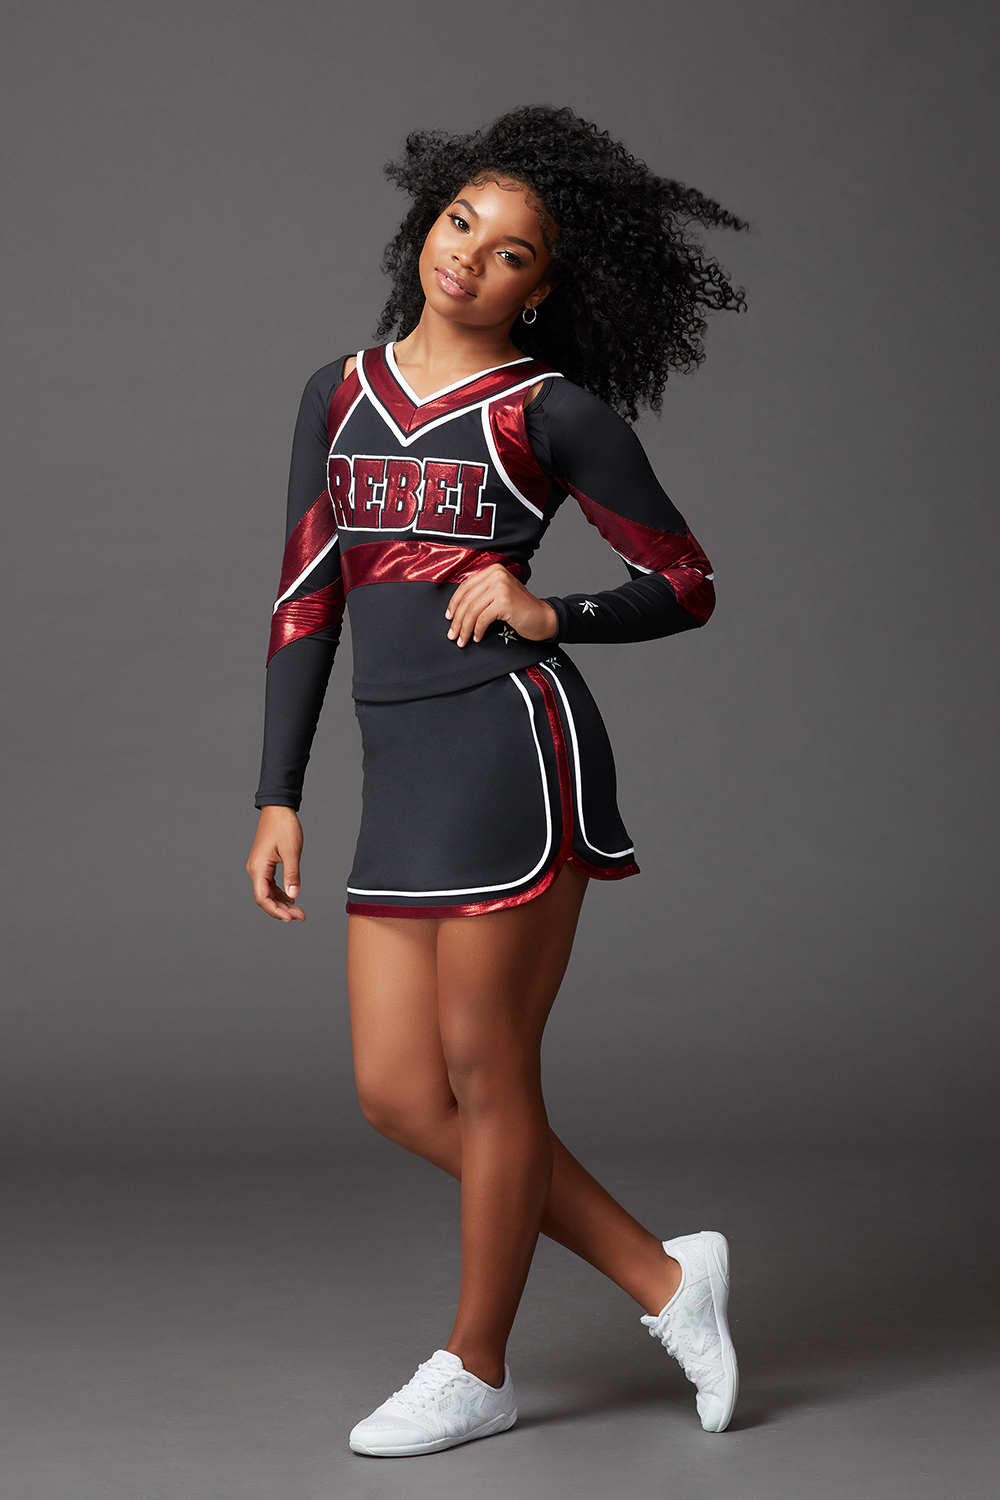 In a world full of uniform trends, - Rebel Athletic Cheer